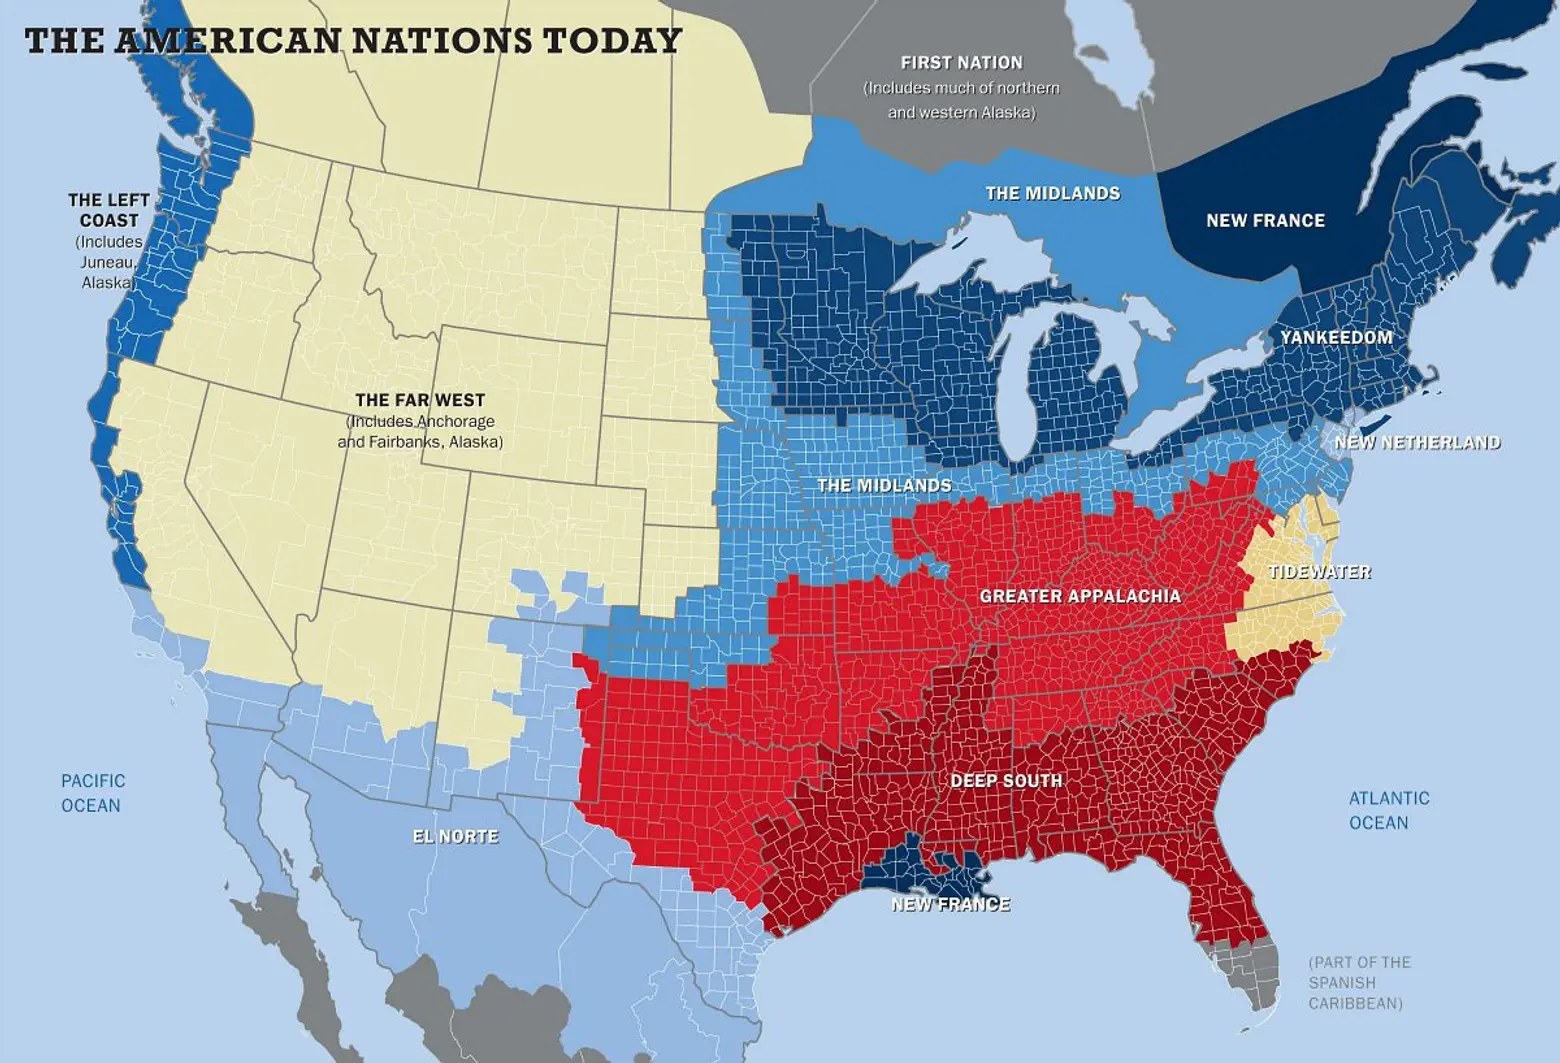 NYC aka New Netherland: Mapping the 11 Different Cultural ‘Nations’ Within the U.S.